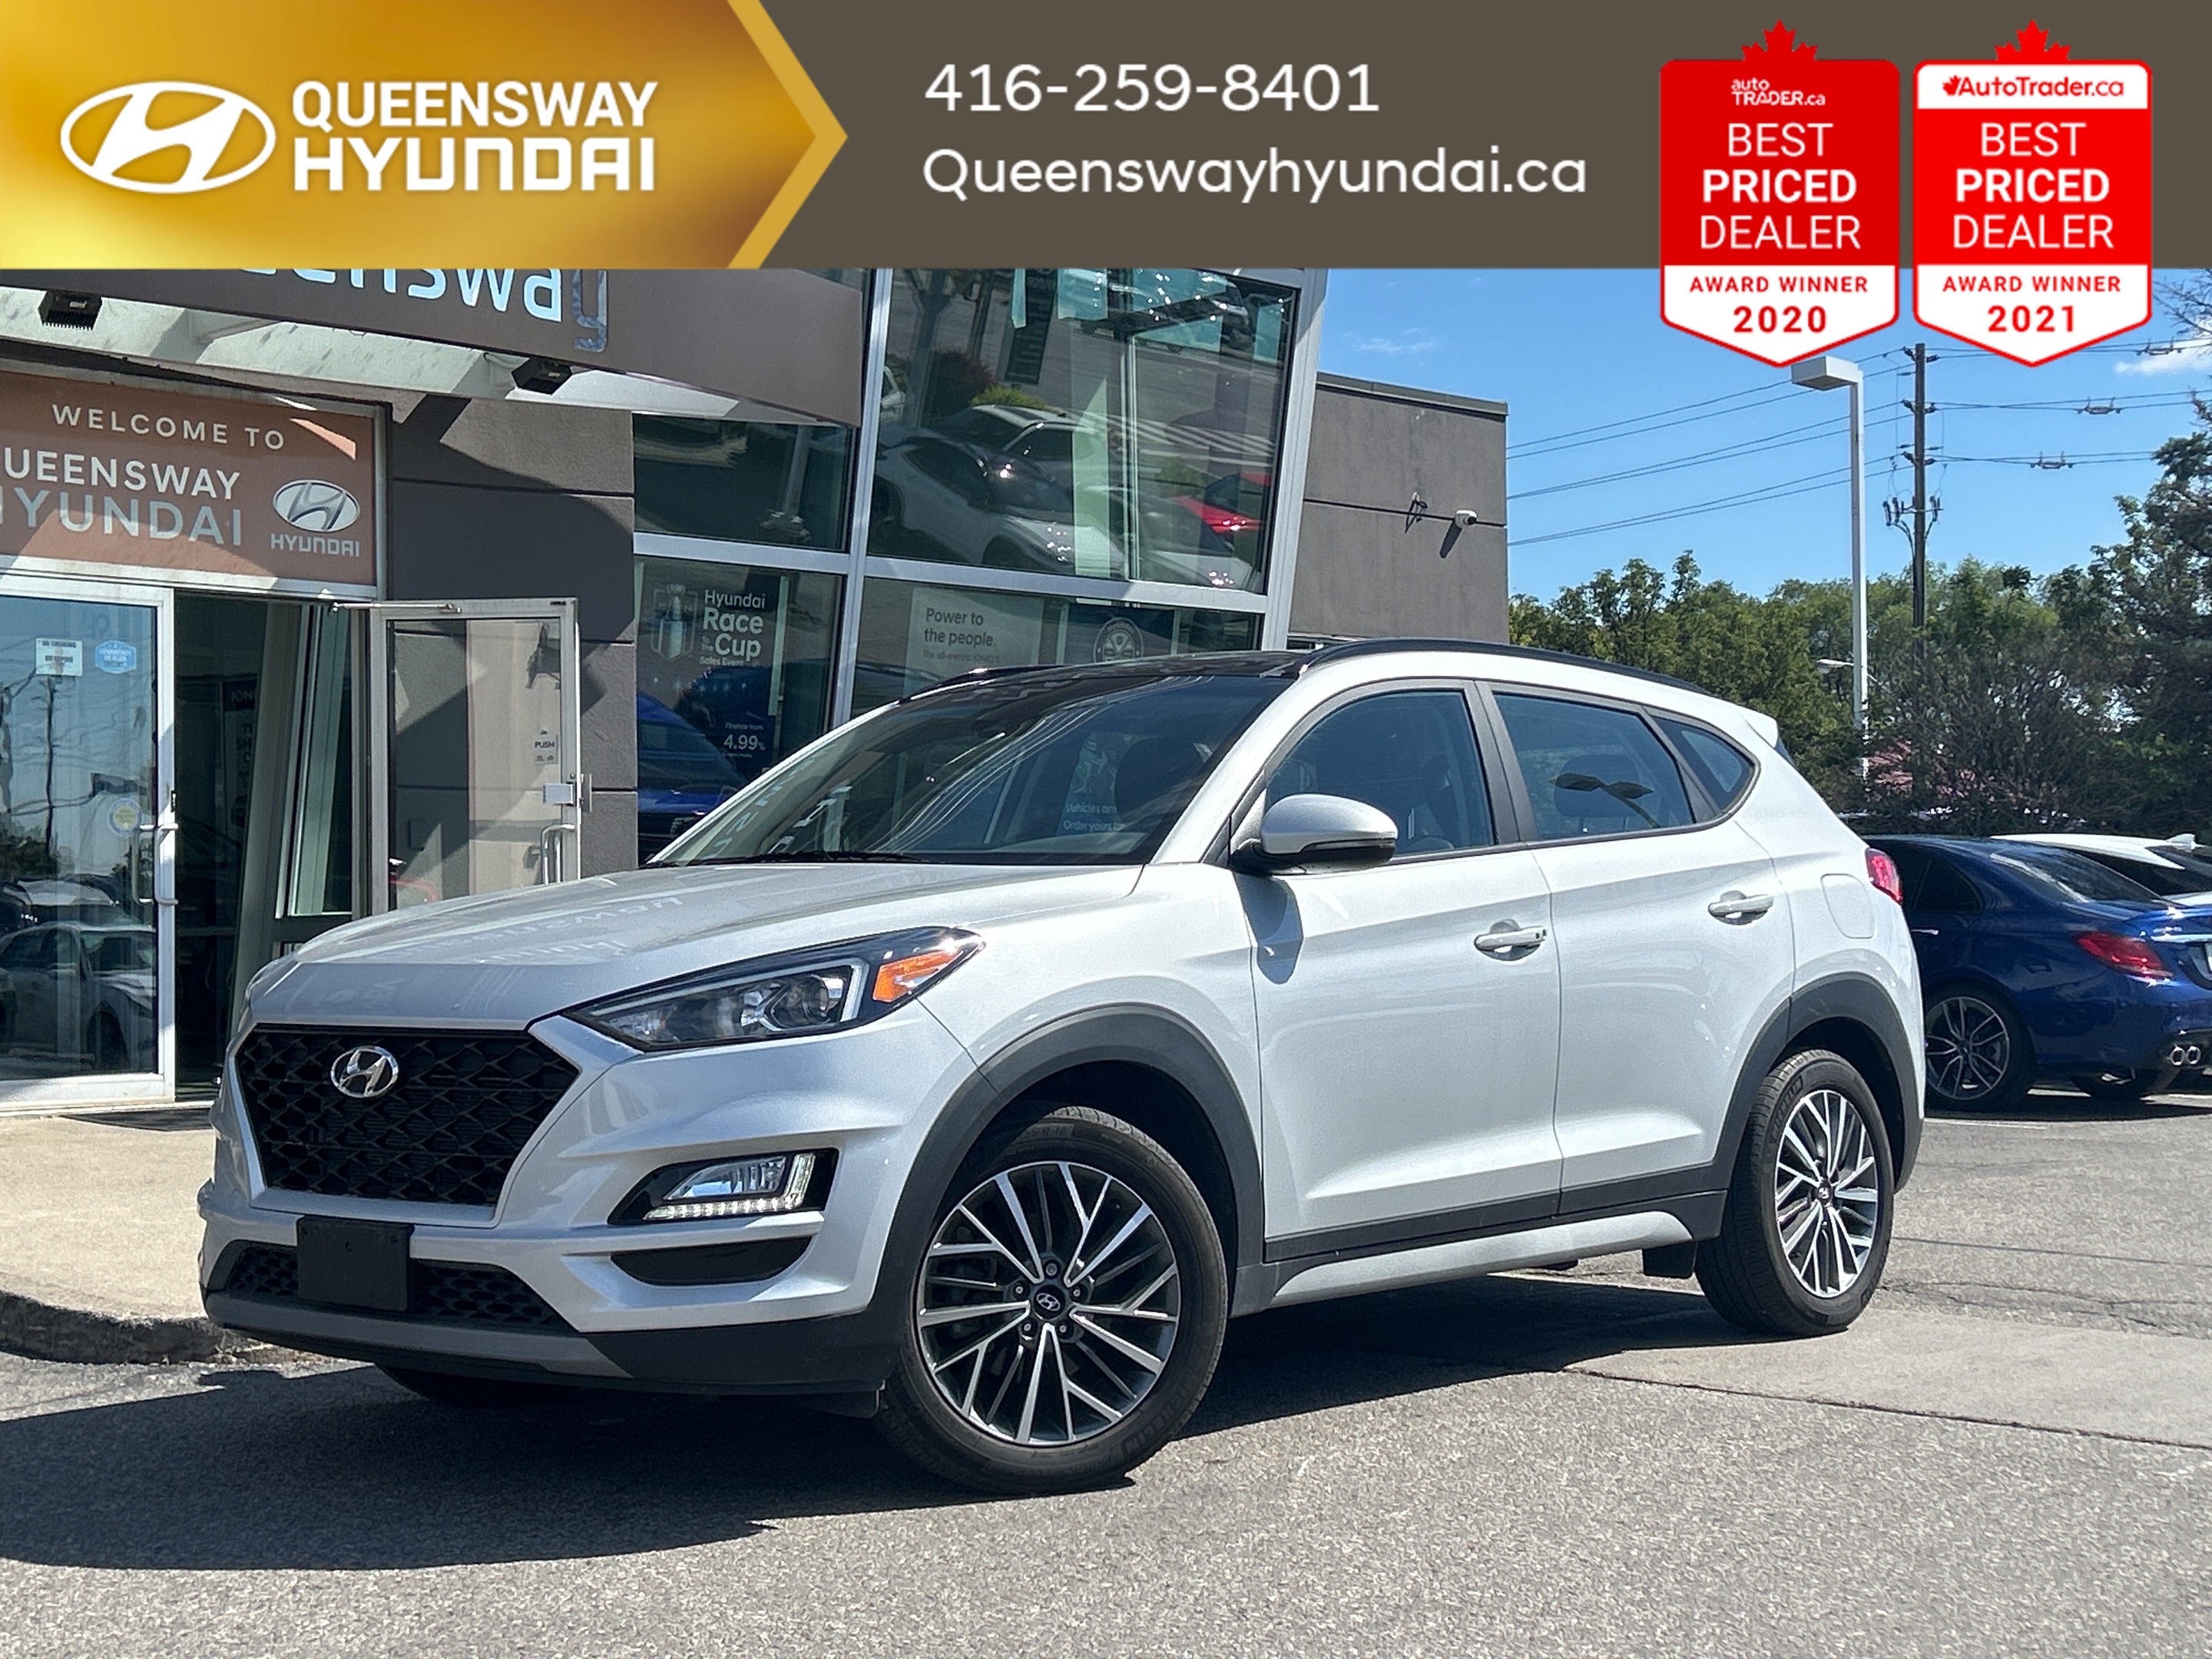 2019 Hyundai Tucson TREND*AWD*LEATHER*PANOROOF*NAVI*LOADED*CLEAN!